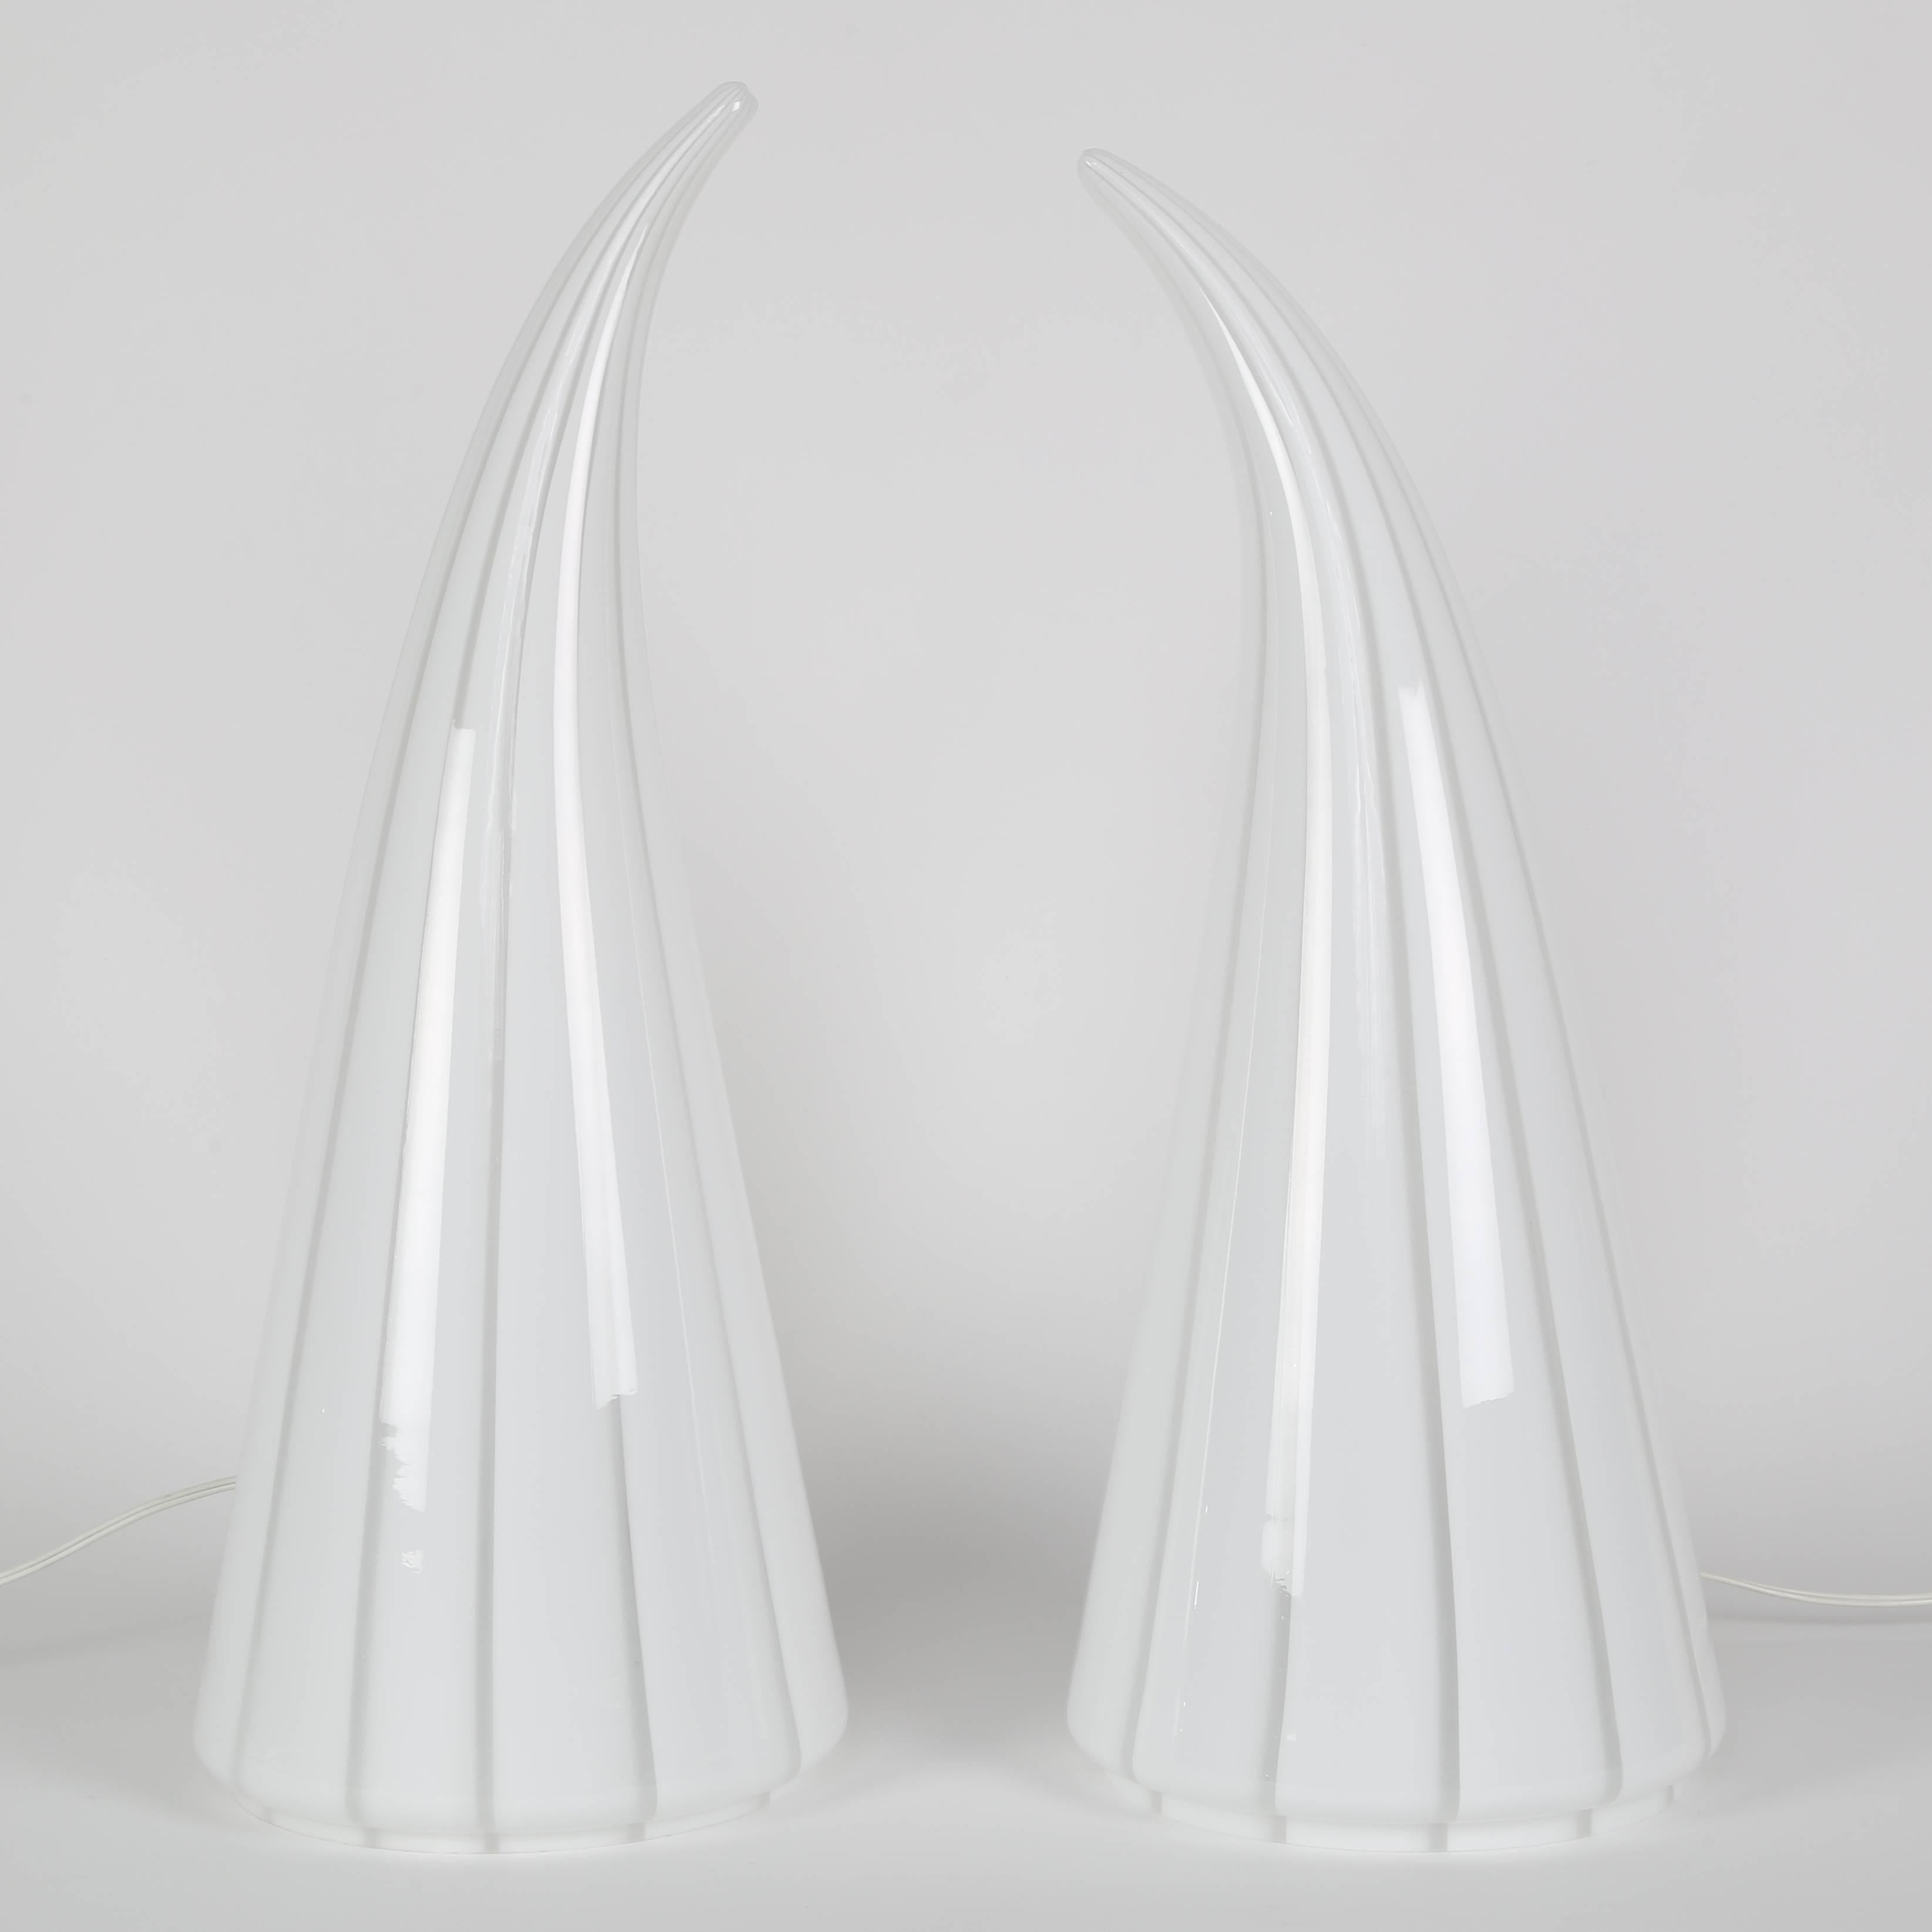 Pair of Vetri Murano Conical Table Lamps, Circa 1980s In Good Condition For Sale In Brooklyn, NY